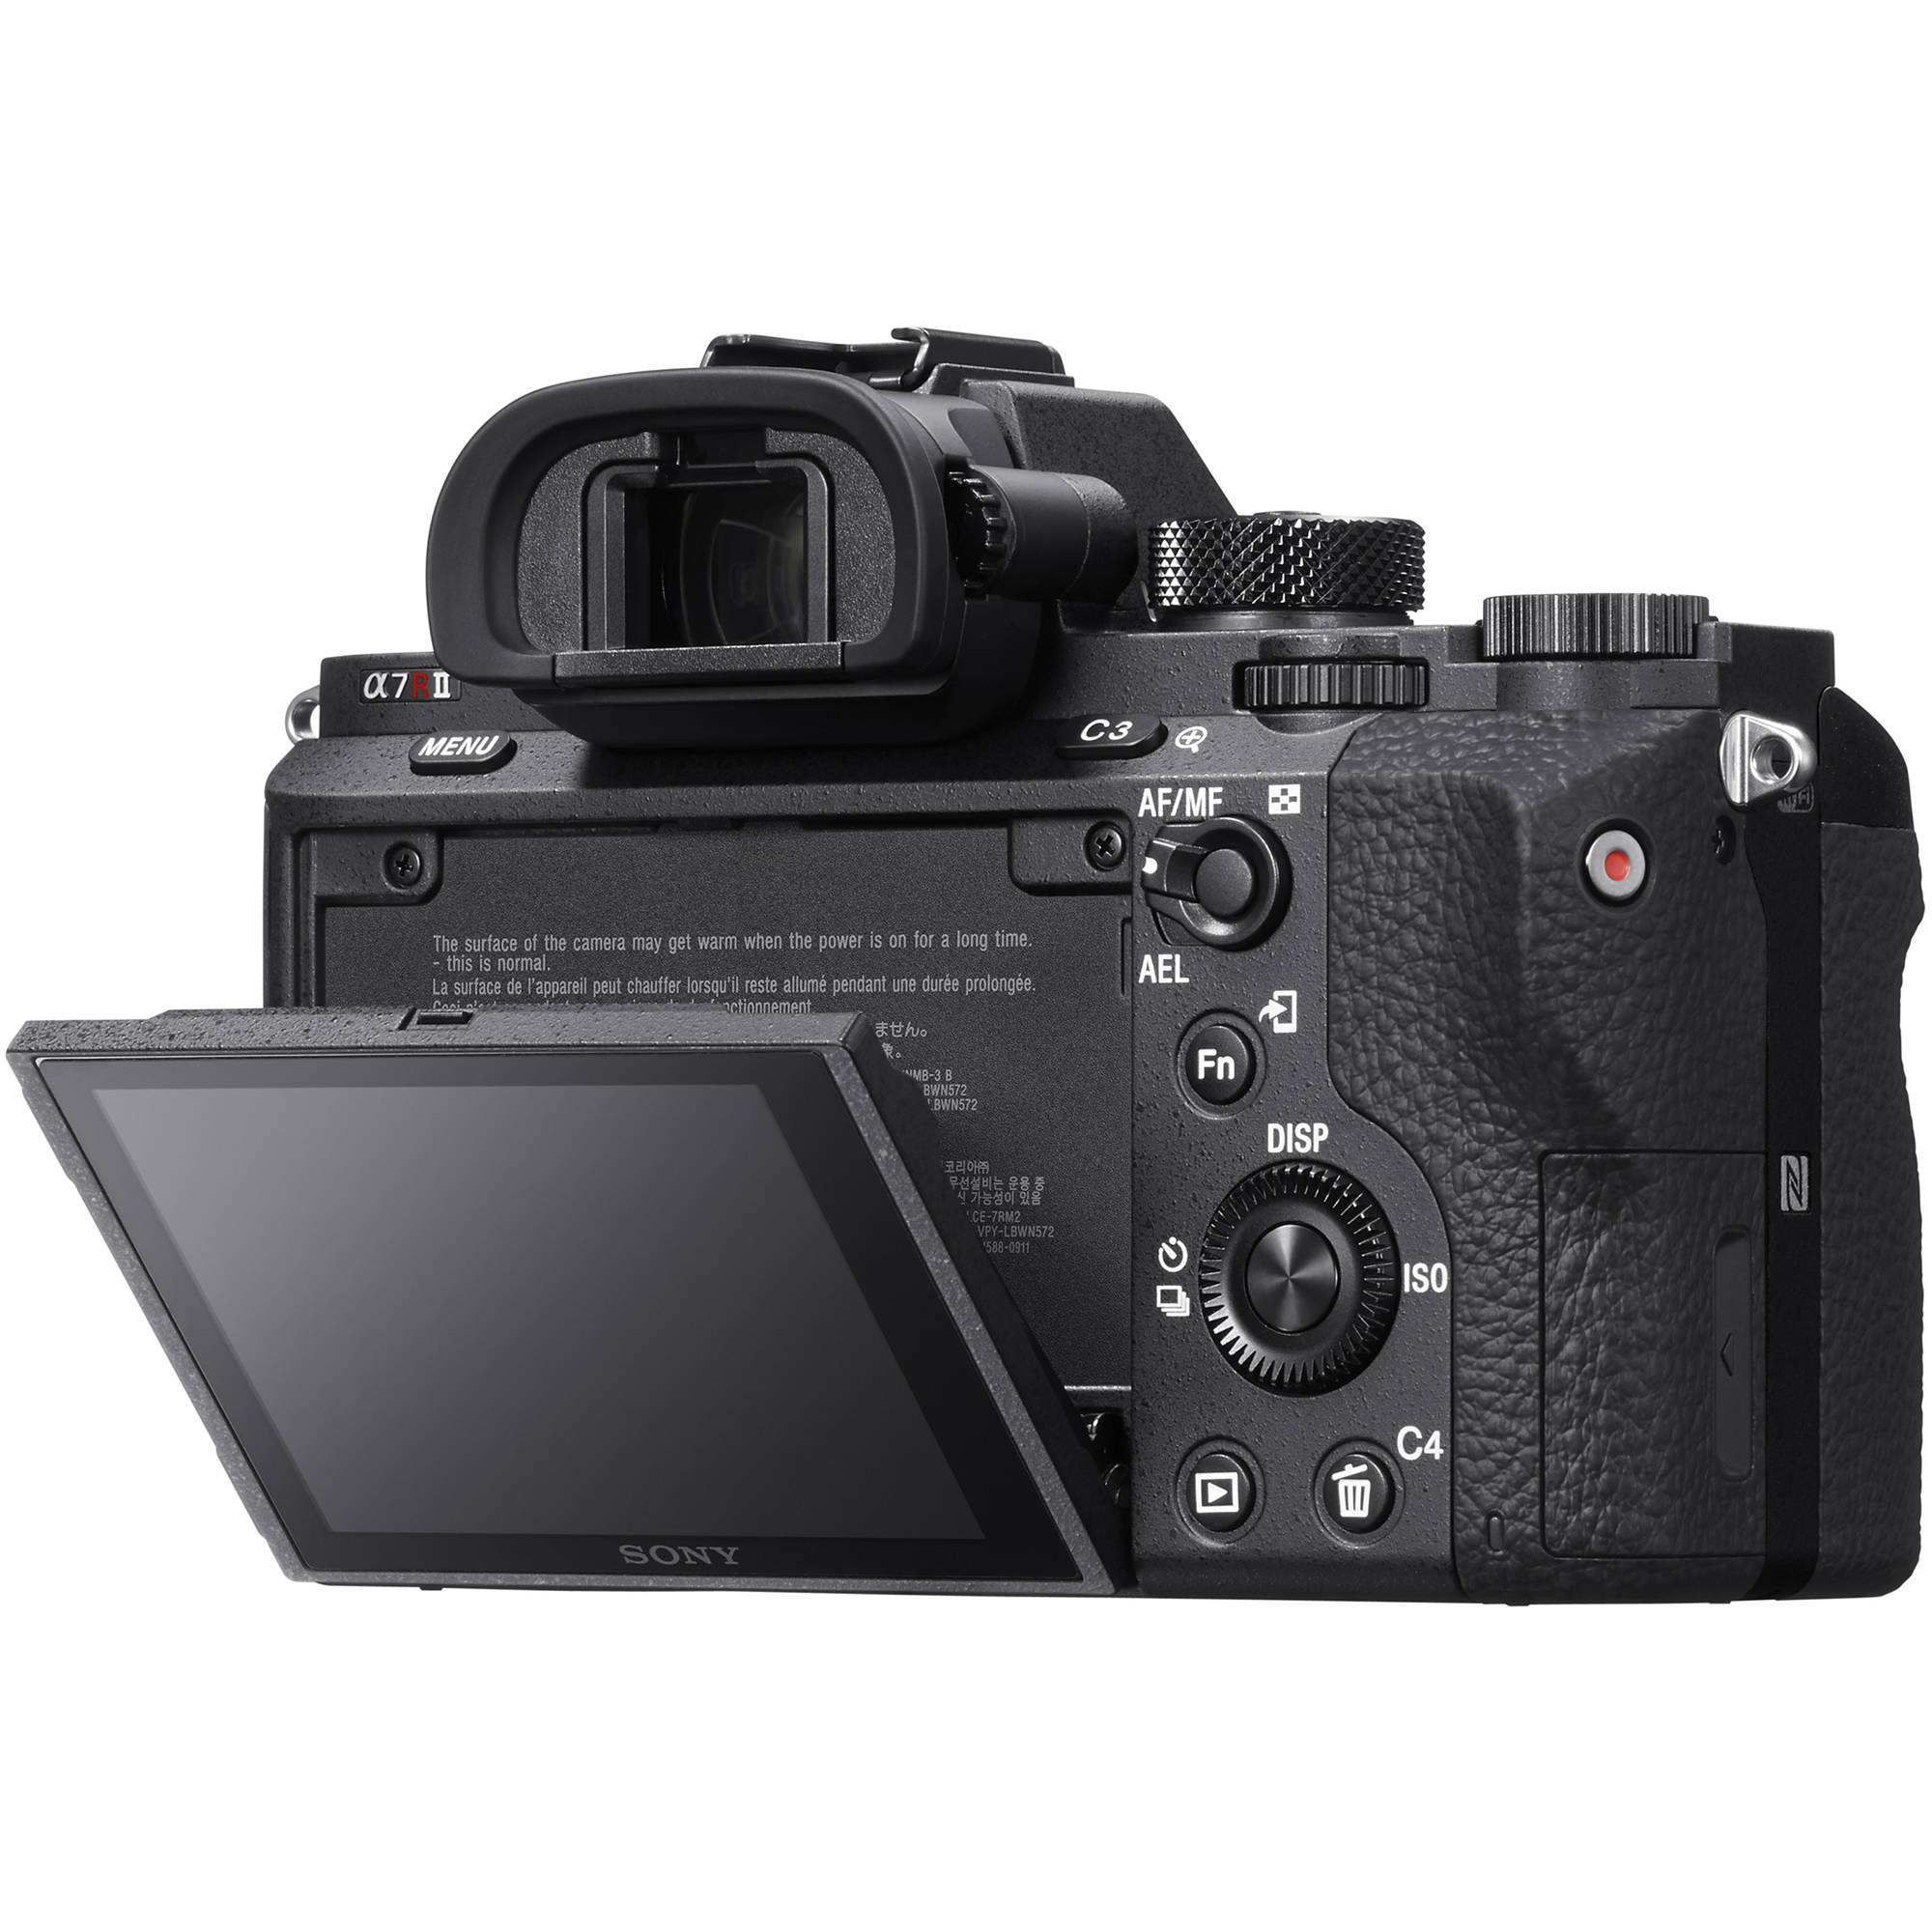 Sony a7R II Full-frame Mirrorless 42.4MP Camera Body + 64GB SDXC Memory Card + Soft Carrying Case + NP-FW50 Battery and Charger + Wireless Remote + Card Reader + Mini Tripod+More - image 3 of 9